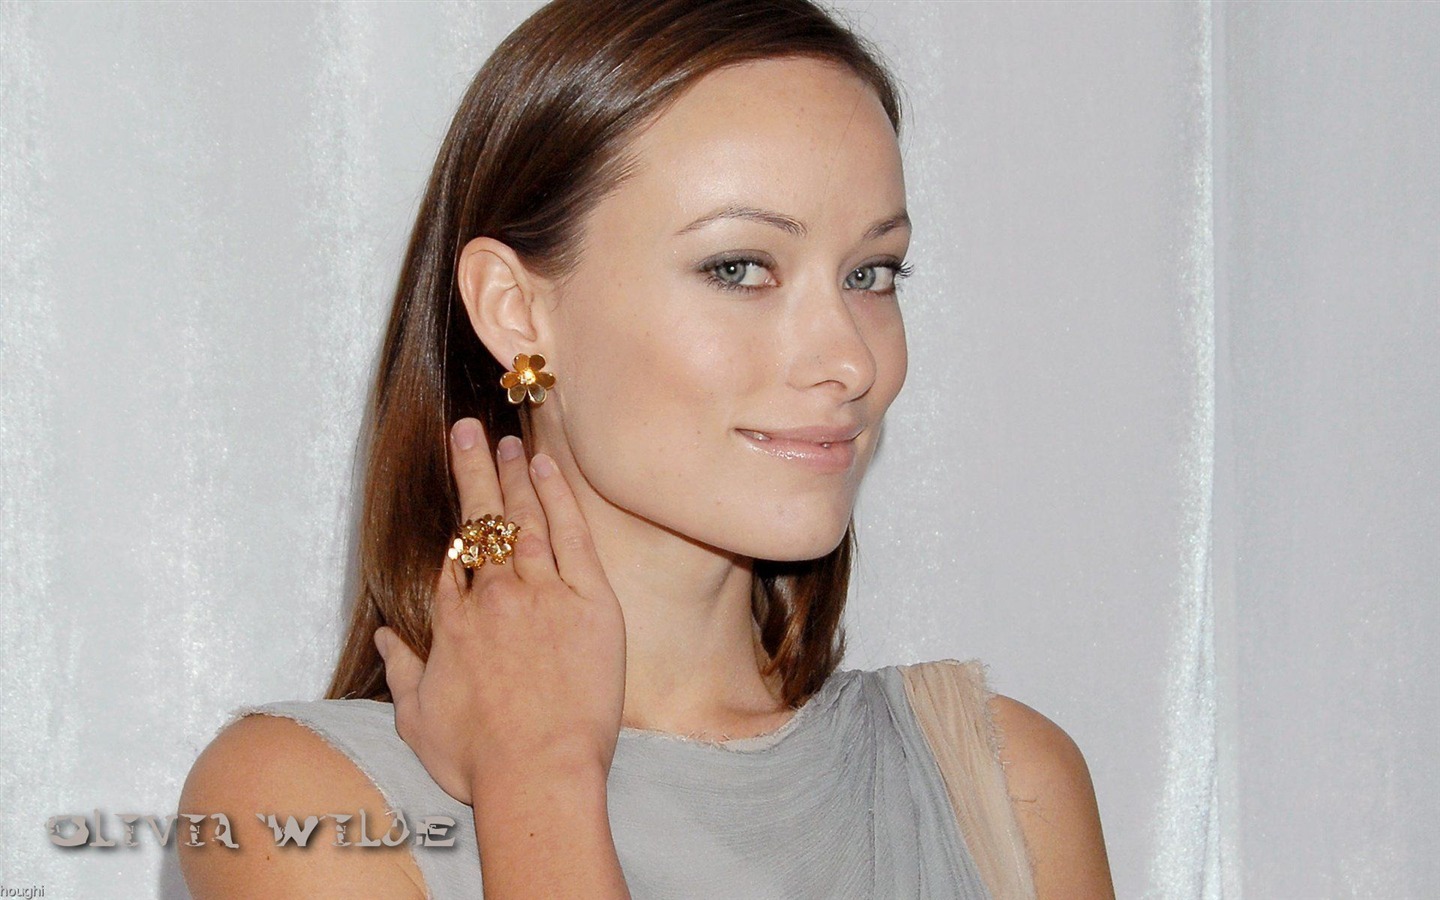 Olivia Wilde #046 - 1440x900 Wallpapers Pictures Photos Images